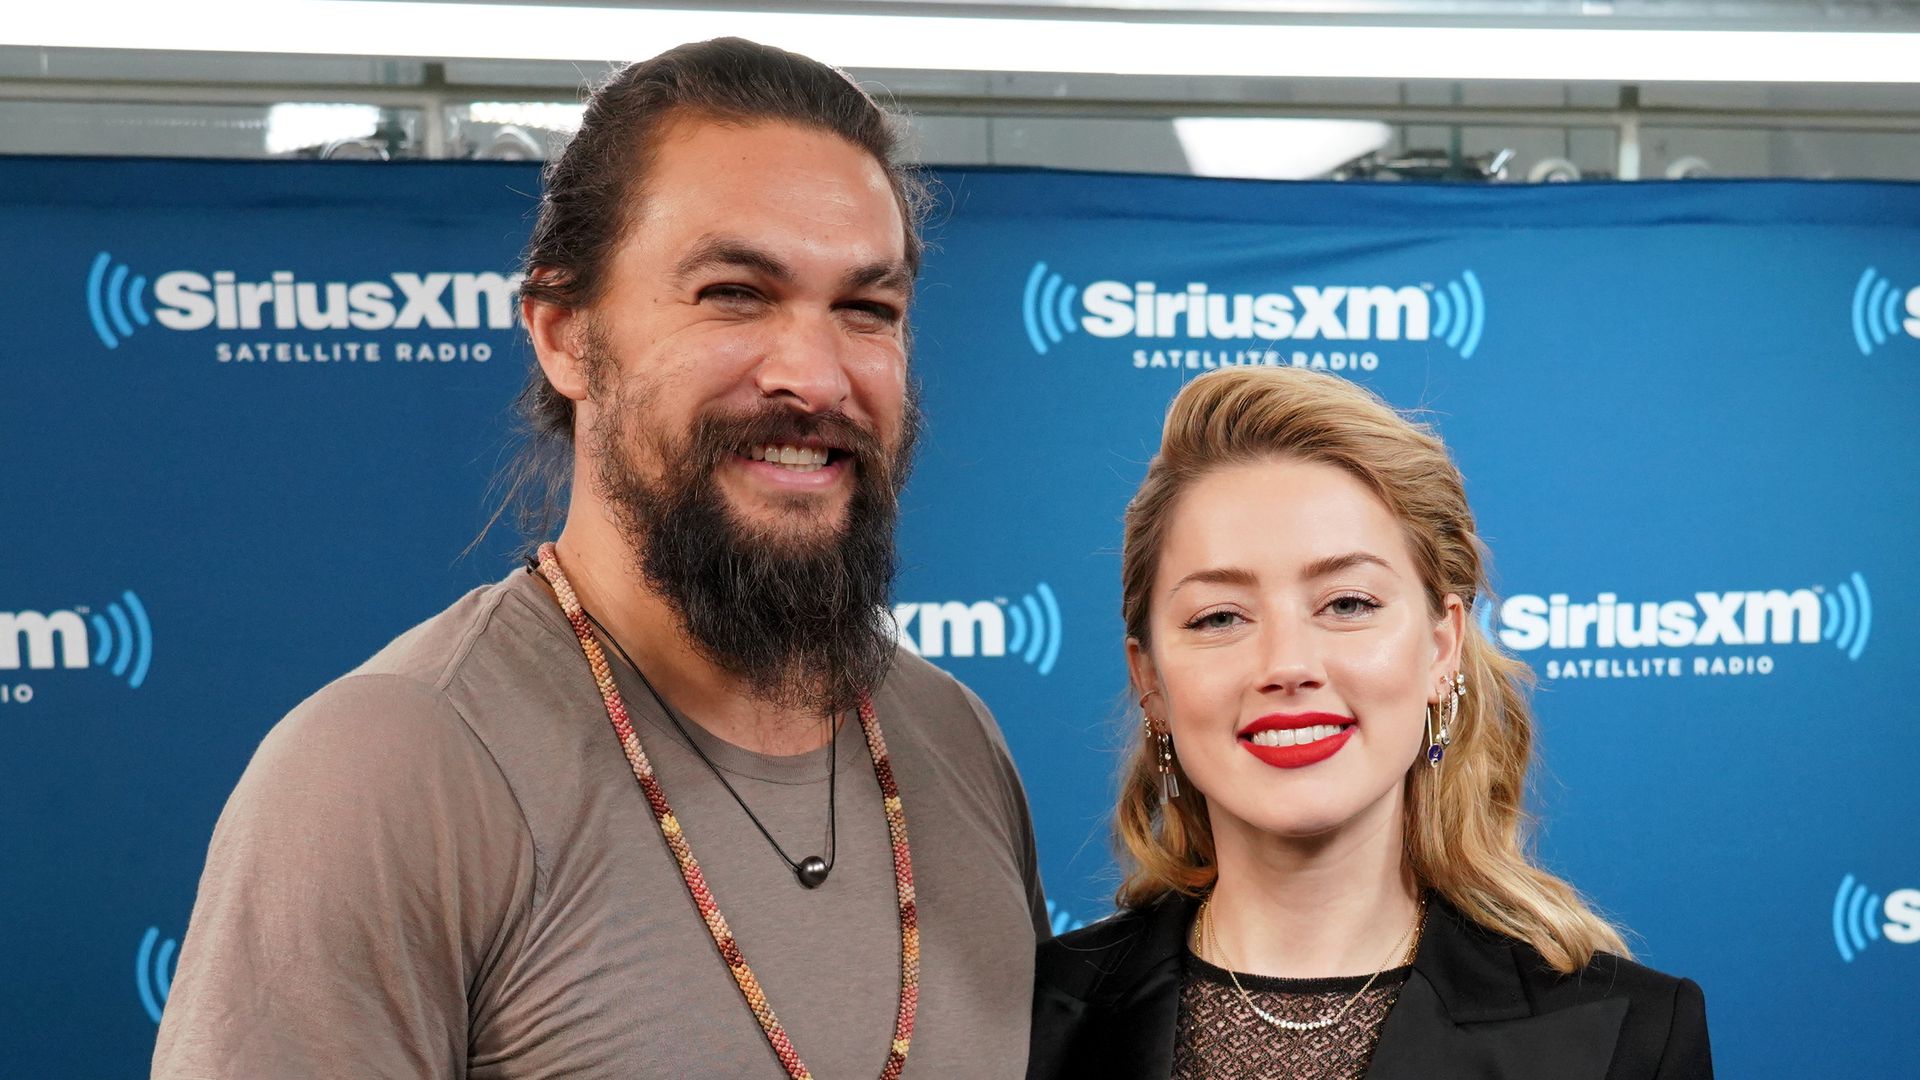 DC Responds to Amber Heard's Claims about Jason Momoa